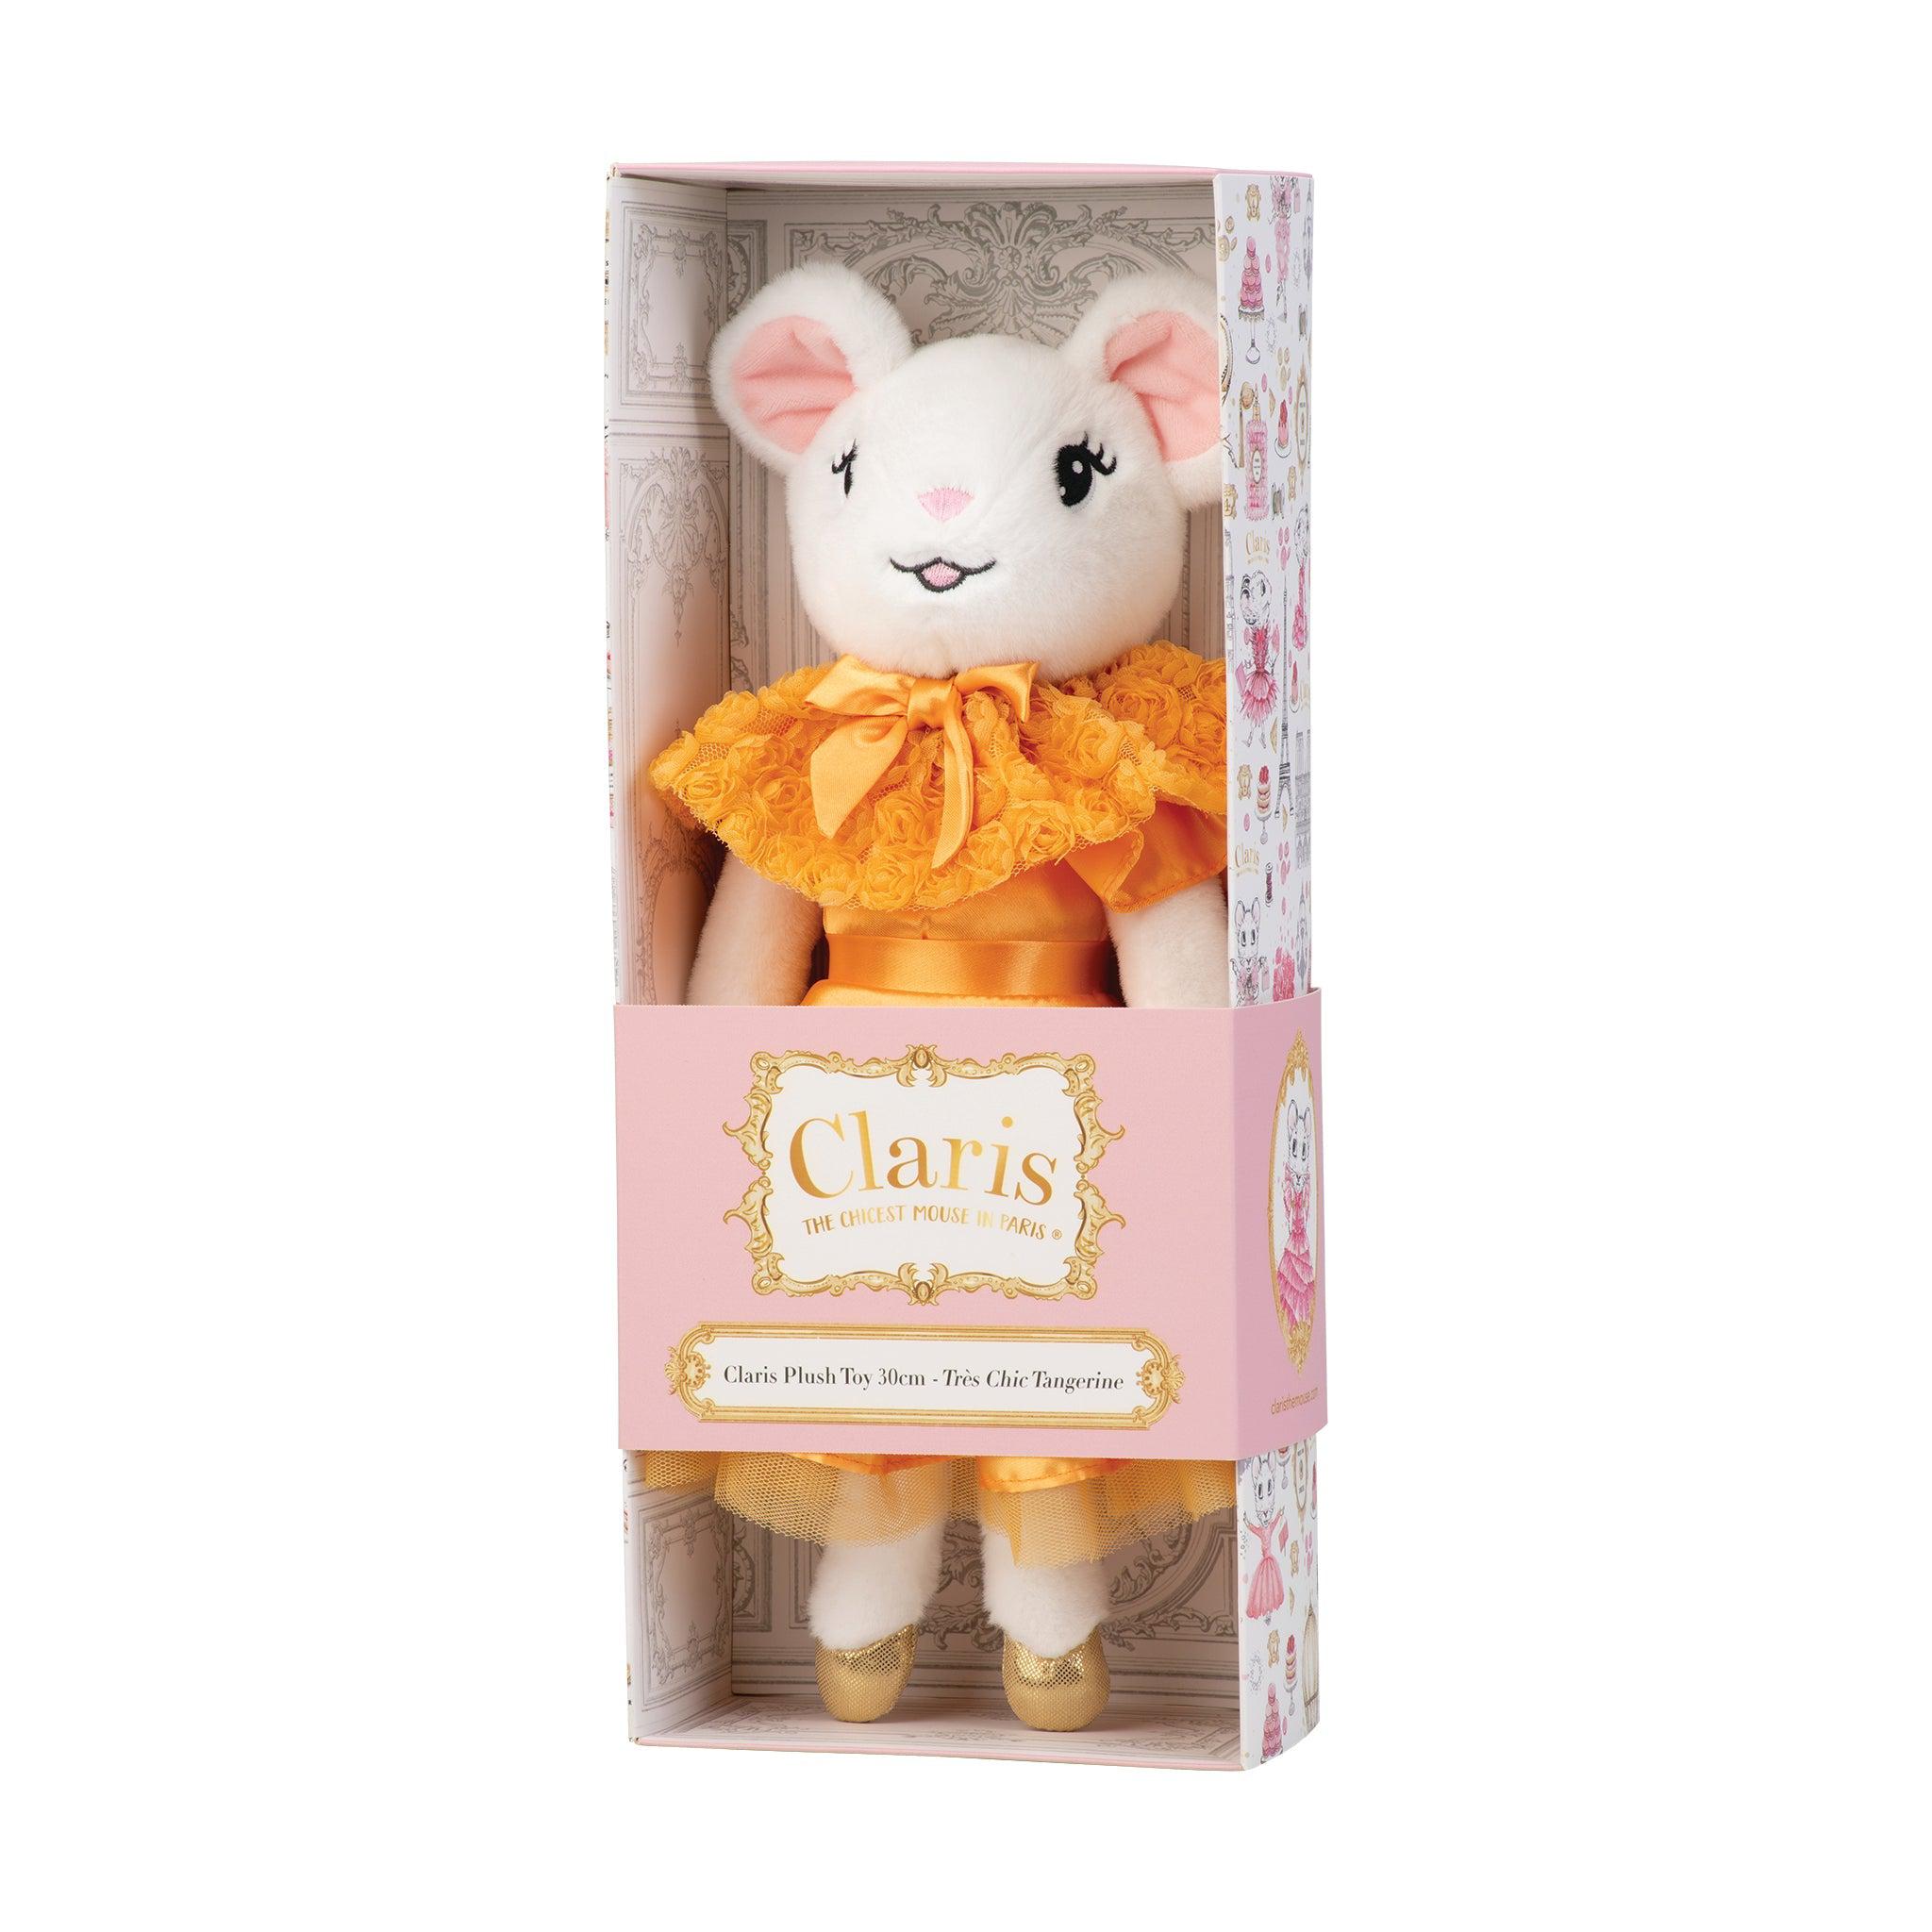 Histoire d'Ours (Paris) Terracotta Mouse Plush Toy 10 NEW in Gift Box NEW